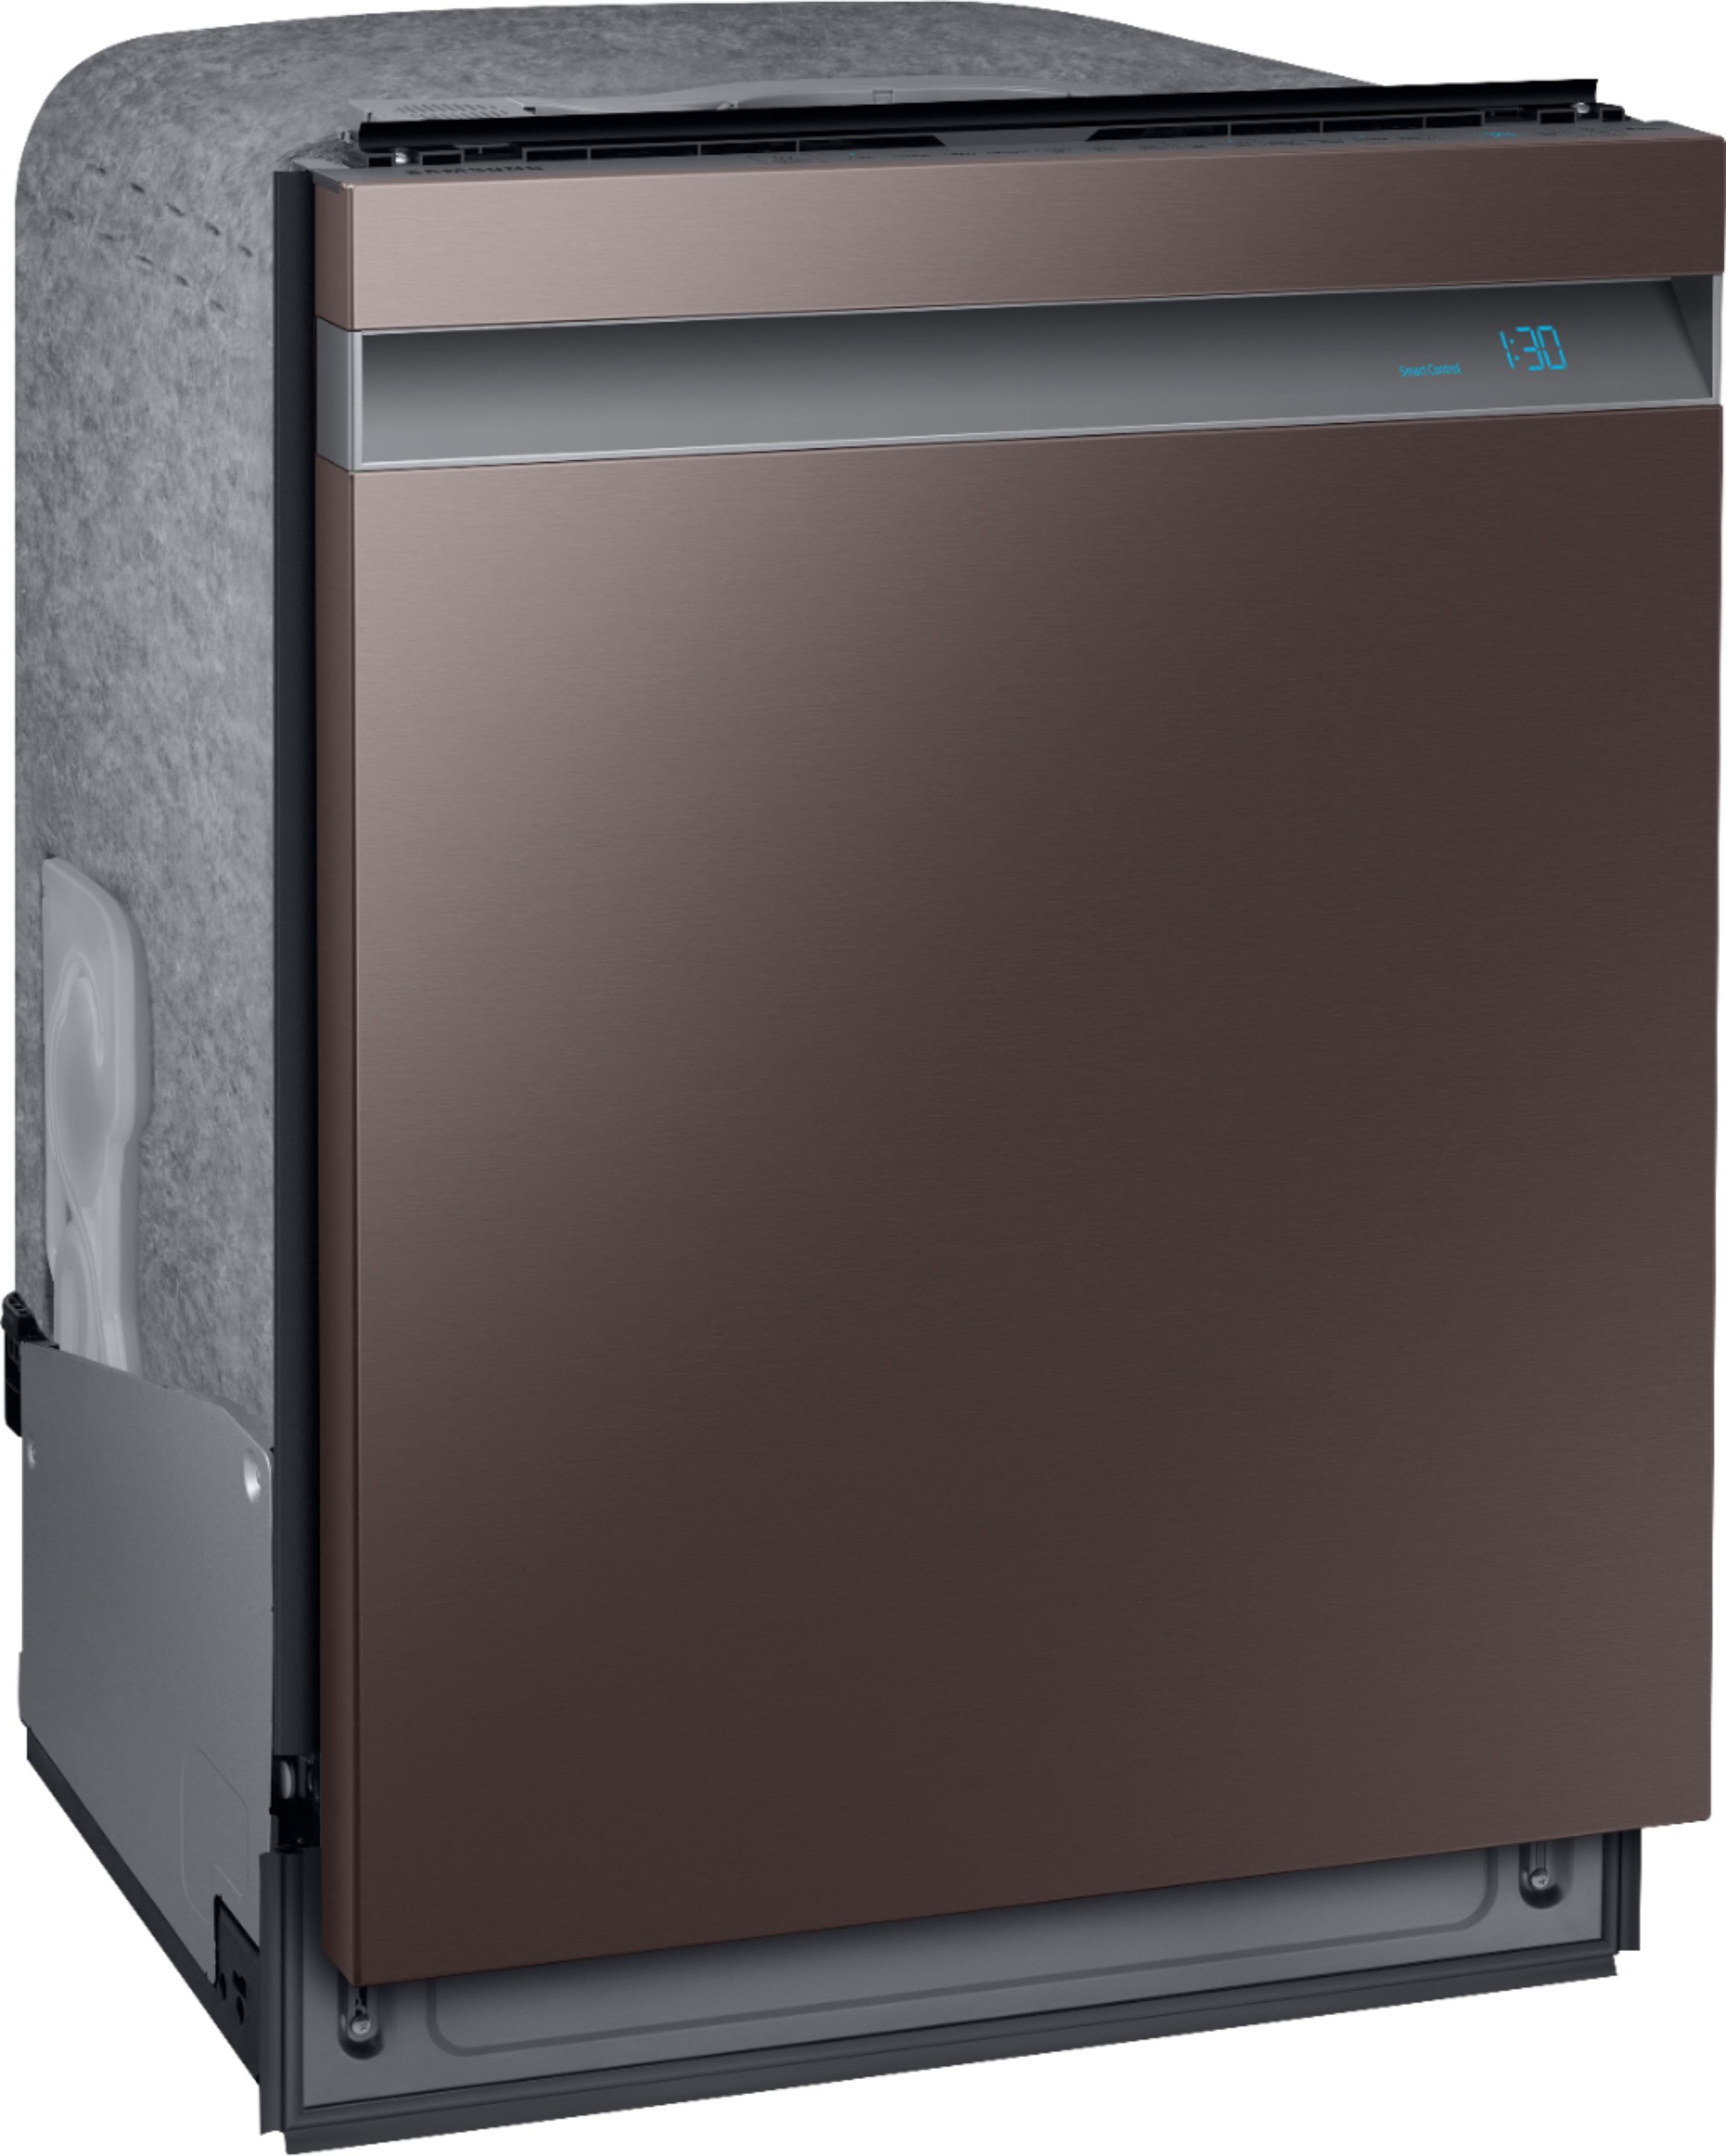 Angle View: LG - 24" Front-Control Built-In Dishwasher with Stainless Steel Tub, QuadWash, 48 dBa - Black Stainless Steel